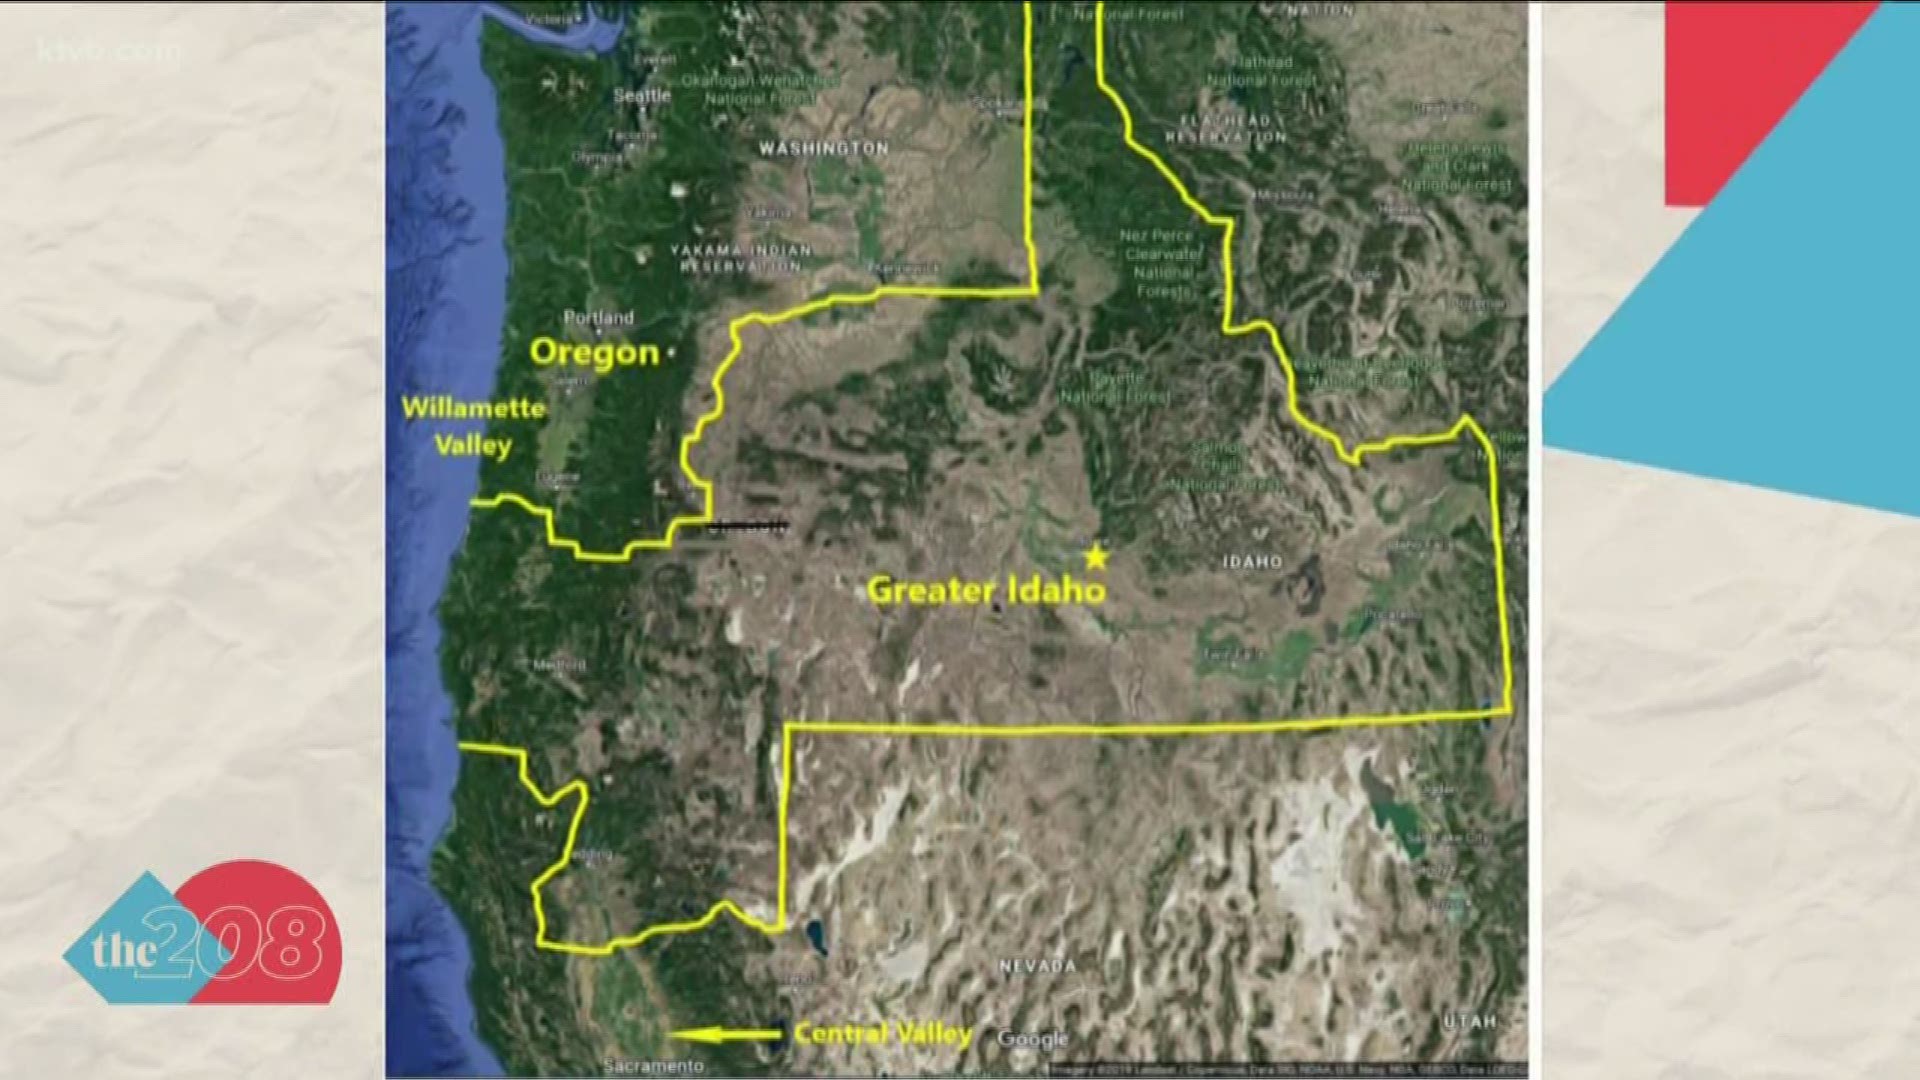 Michael McCarter wants a large chunk of Oregon and a part of Northern California to become Idaho.